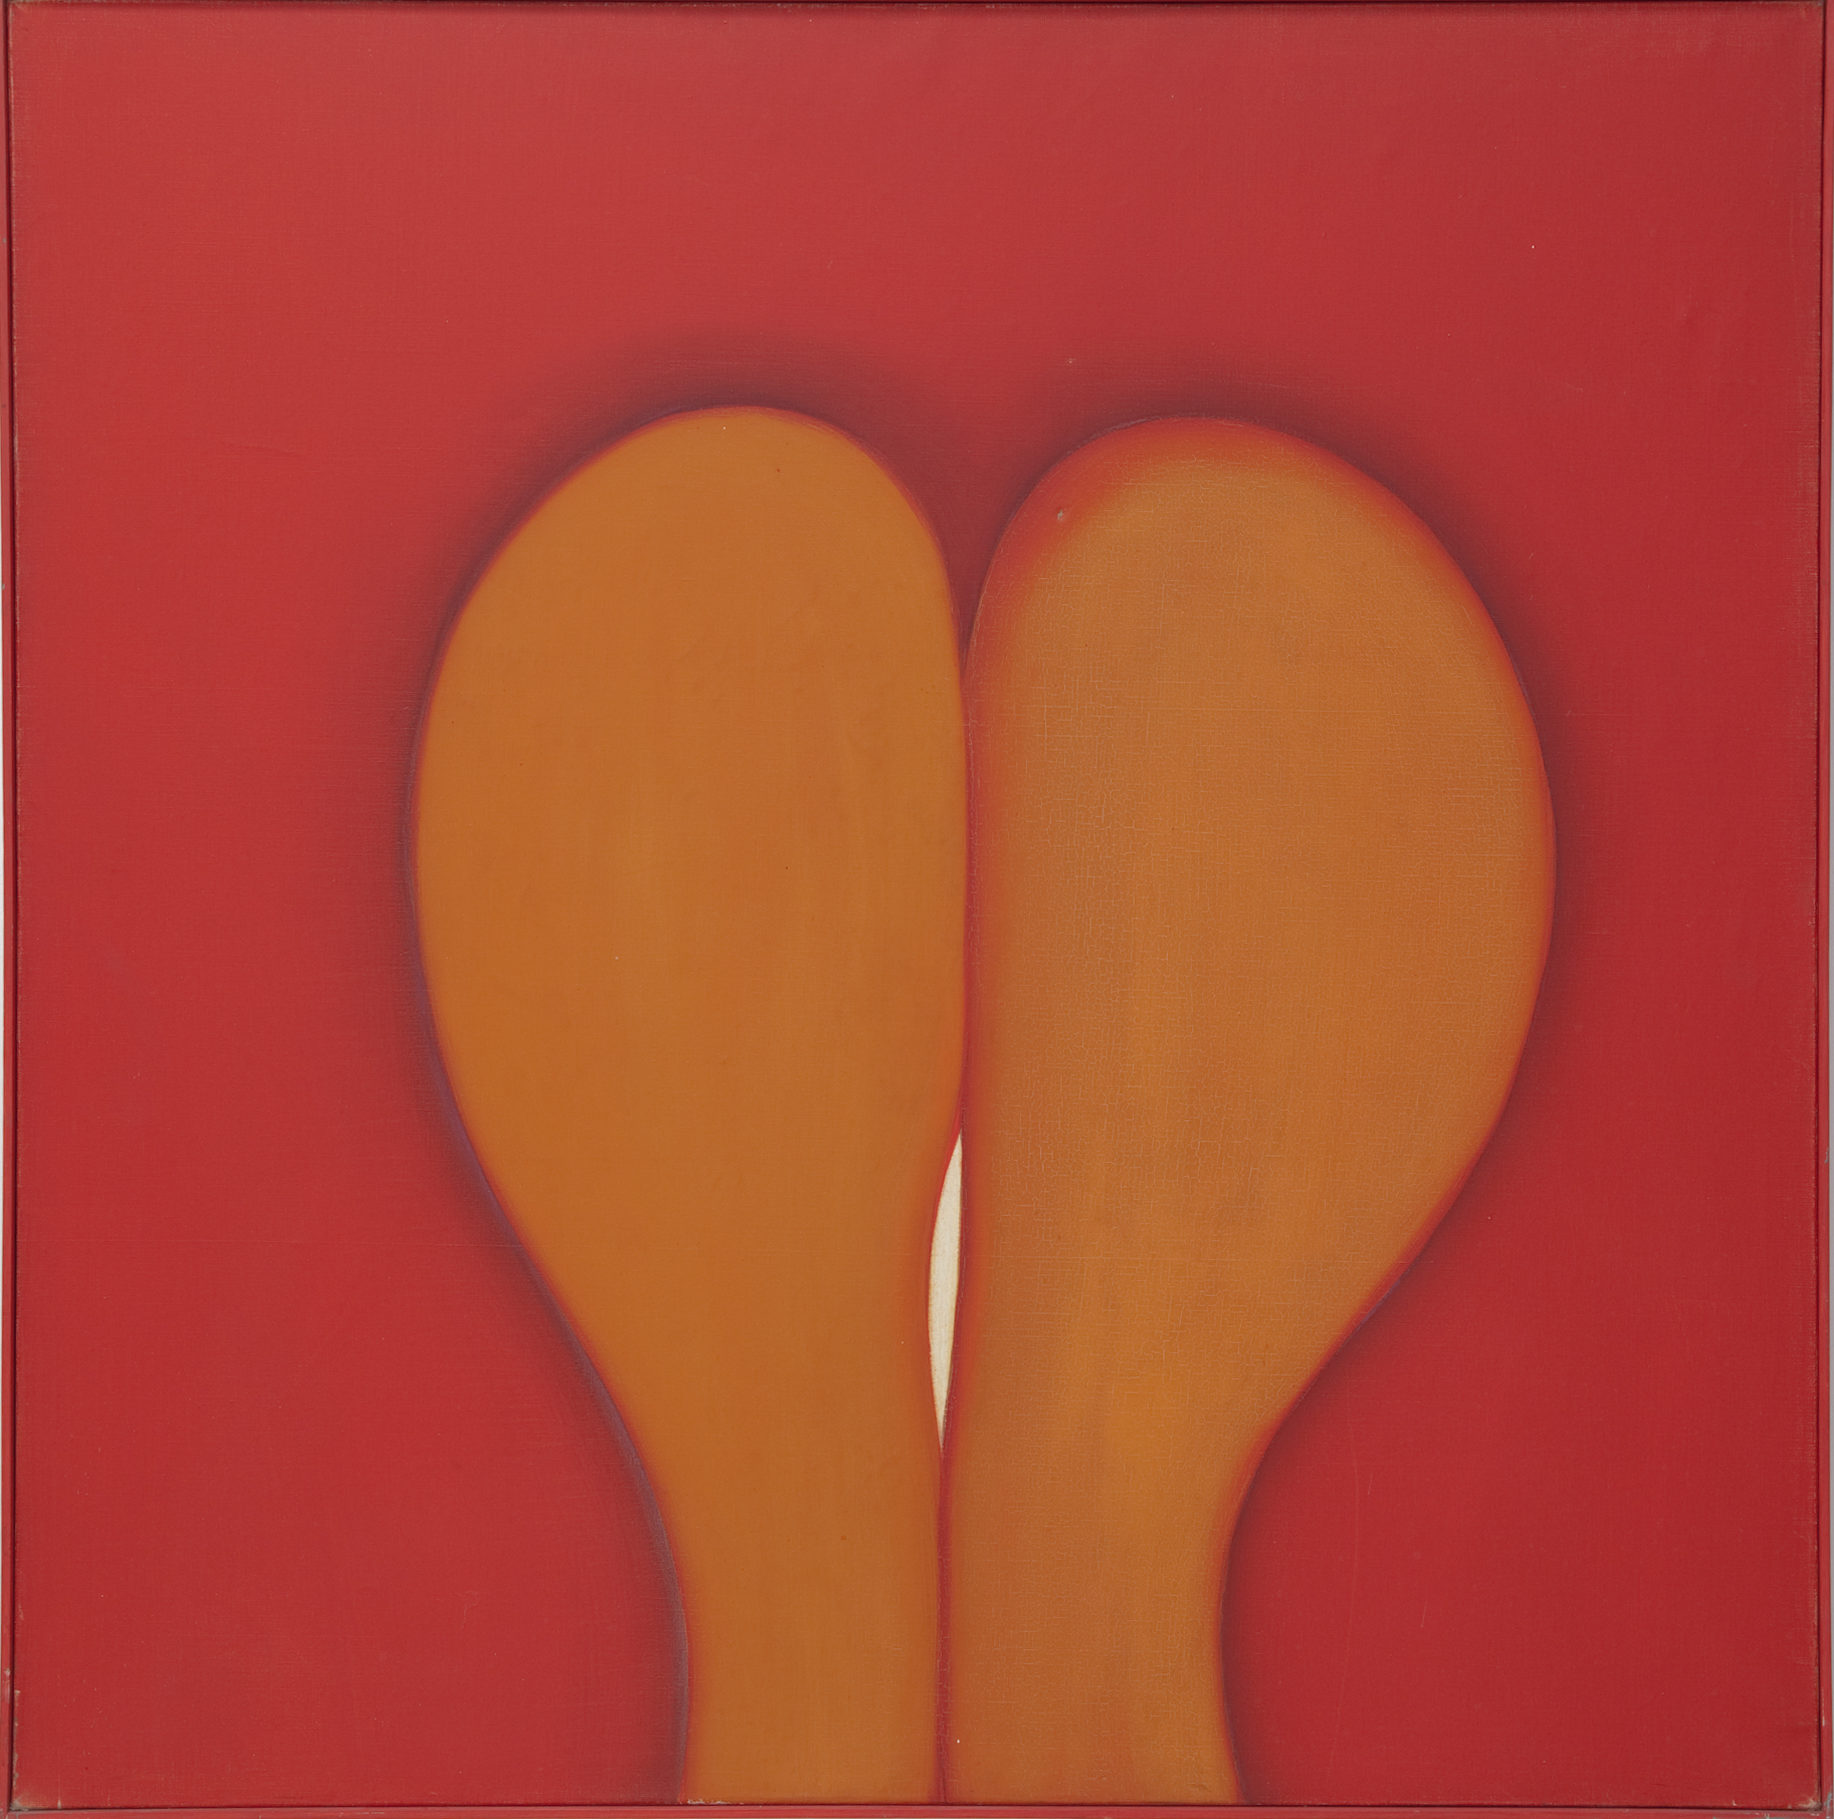 a bent over orange posterior on a red background